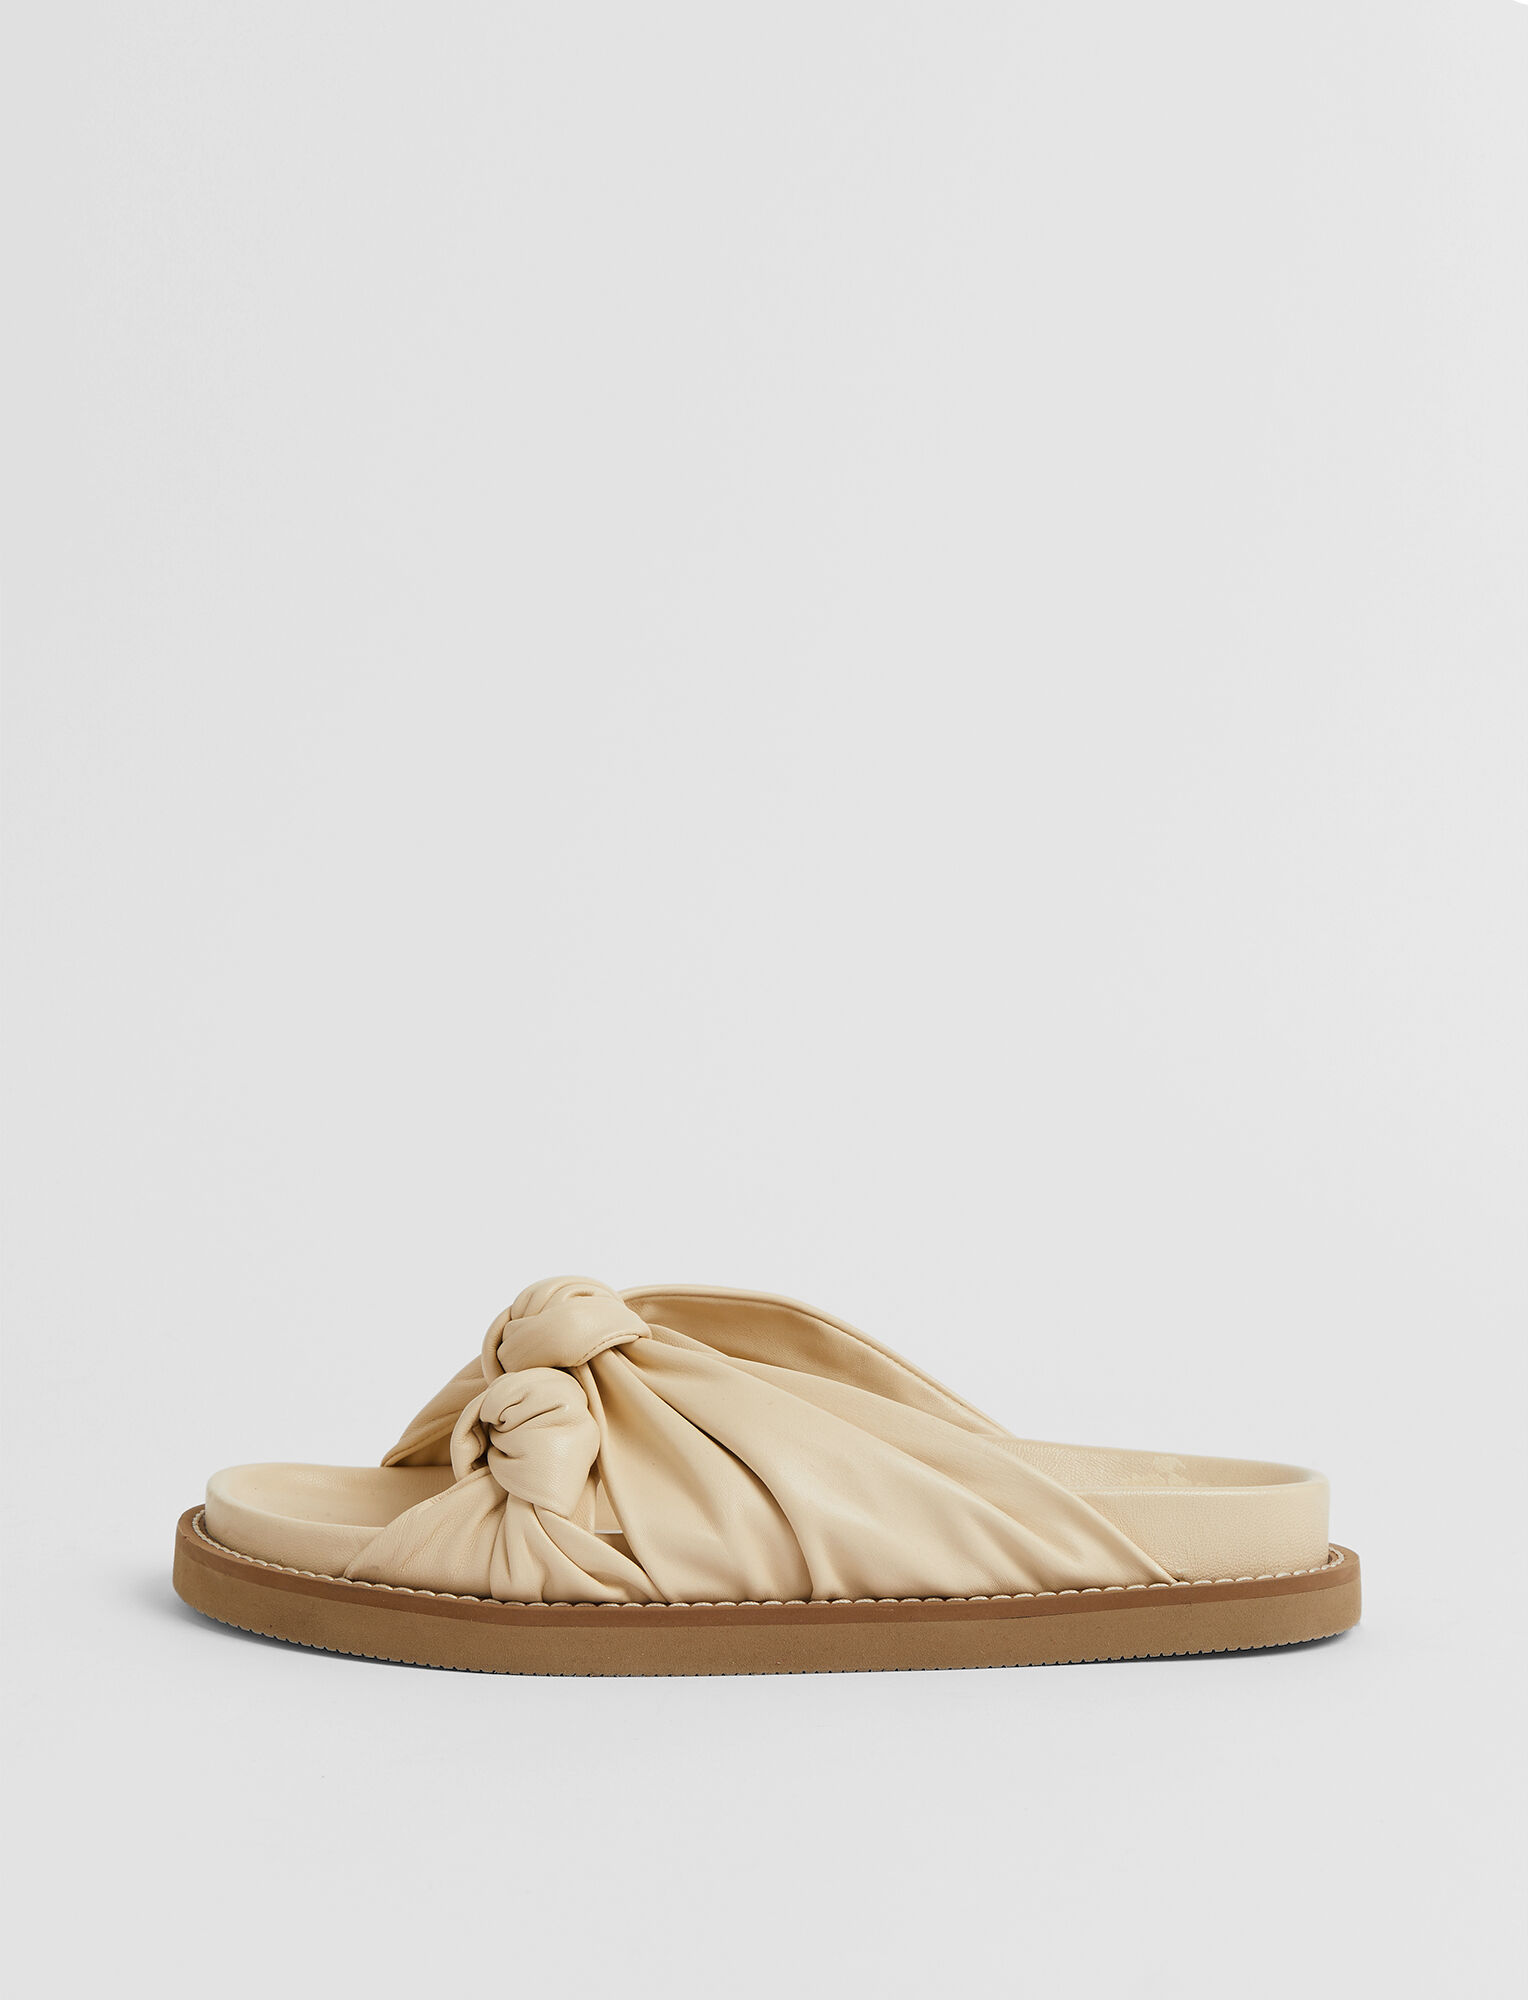 Joseph, Leather Big Knot Sandals, in Fawn